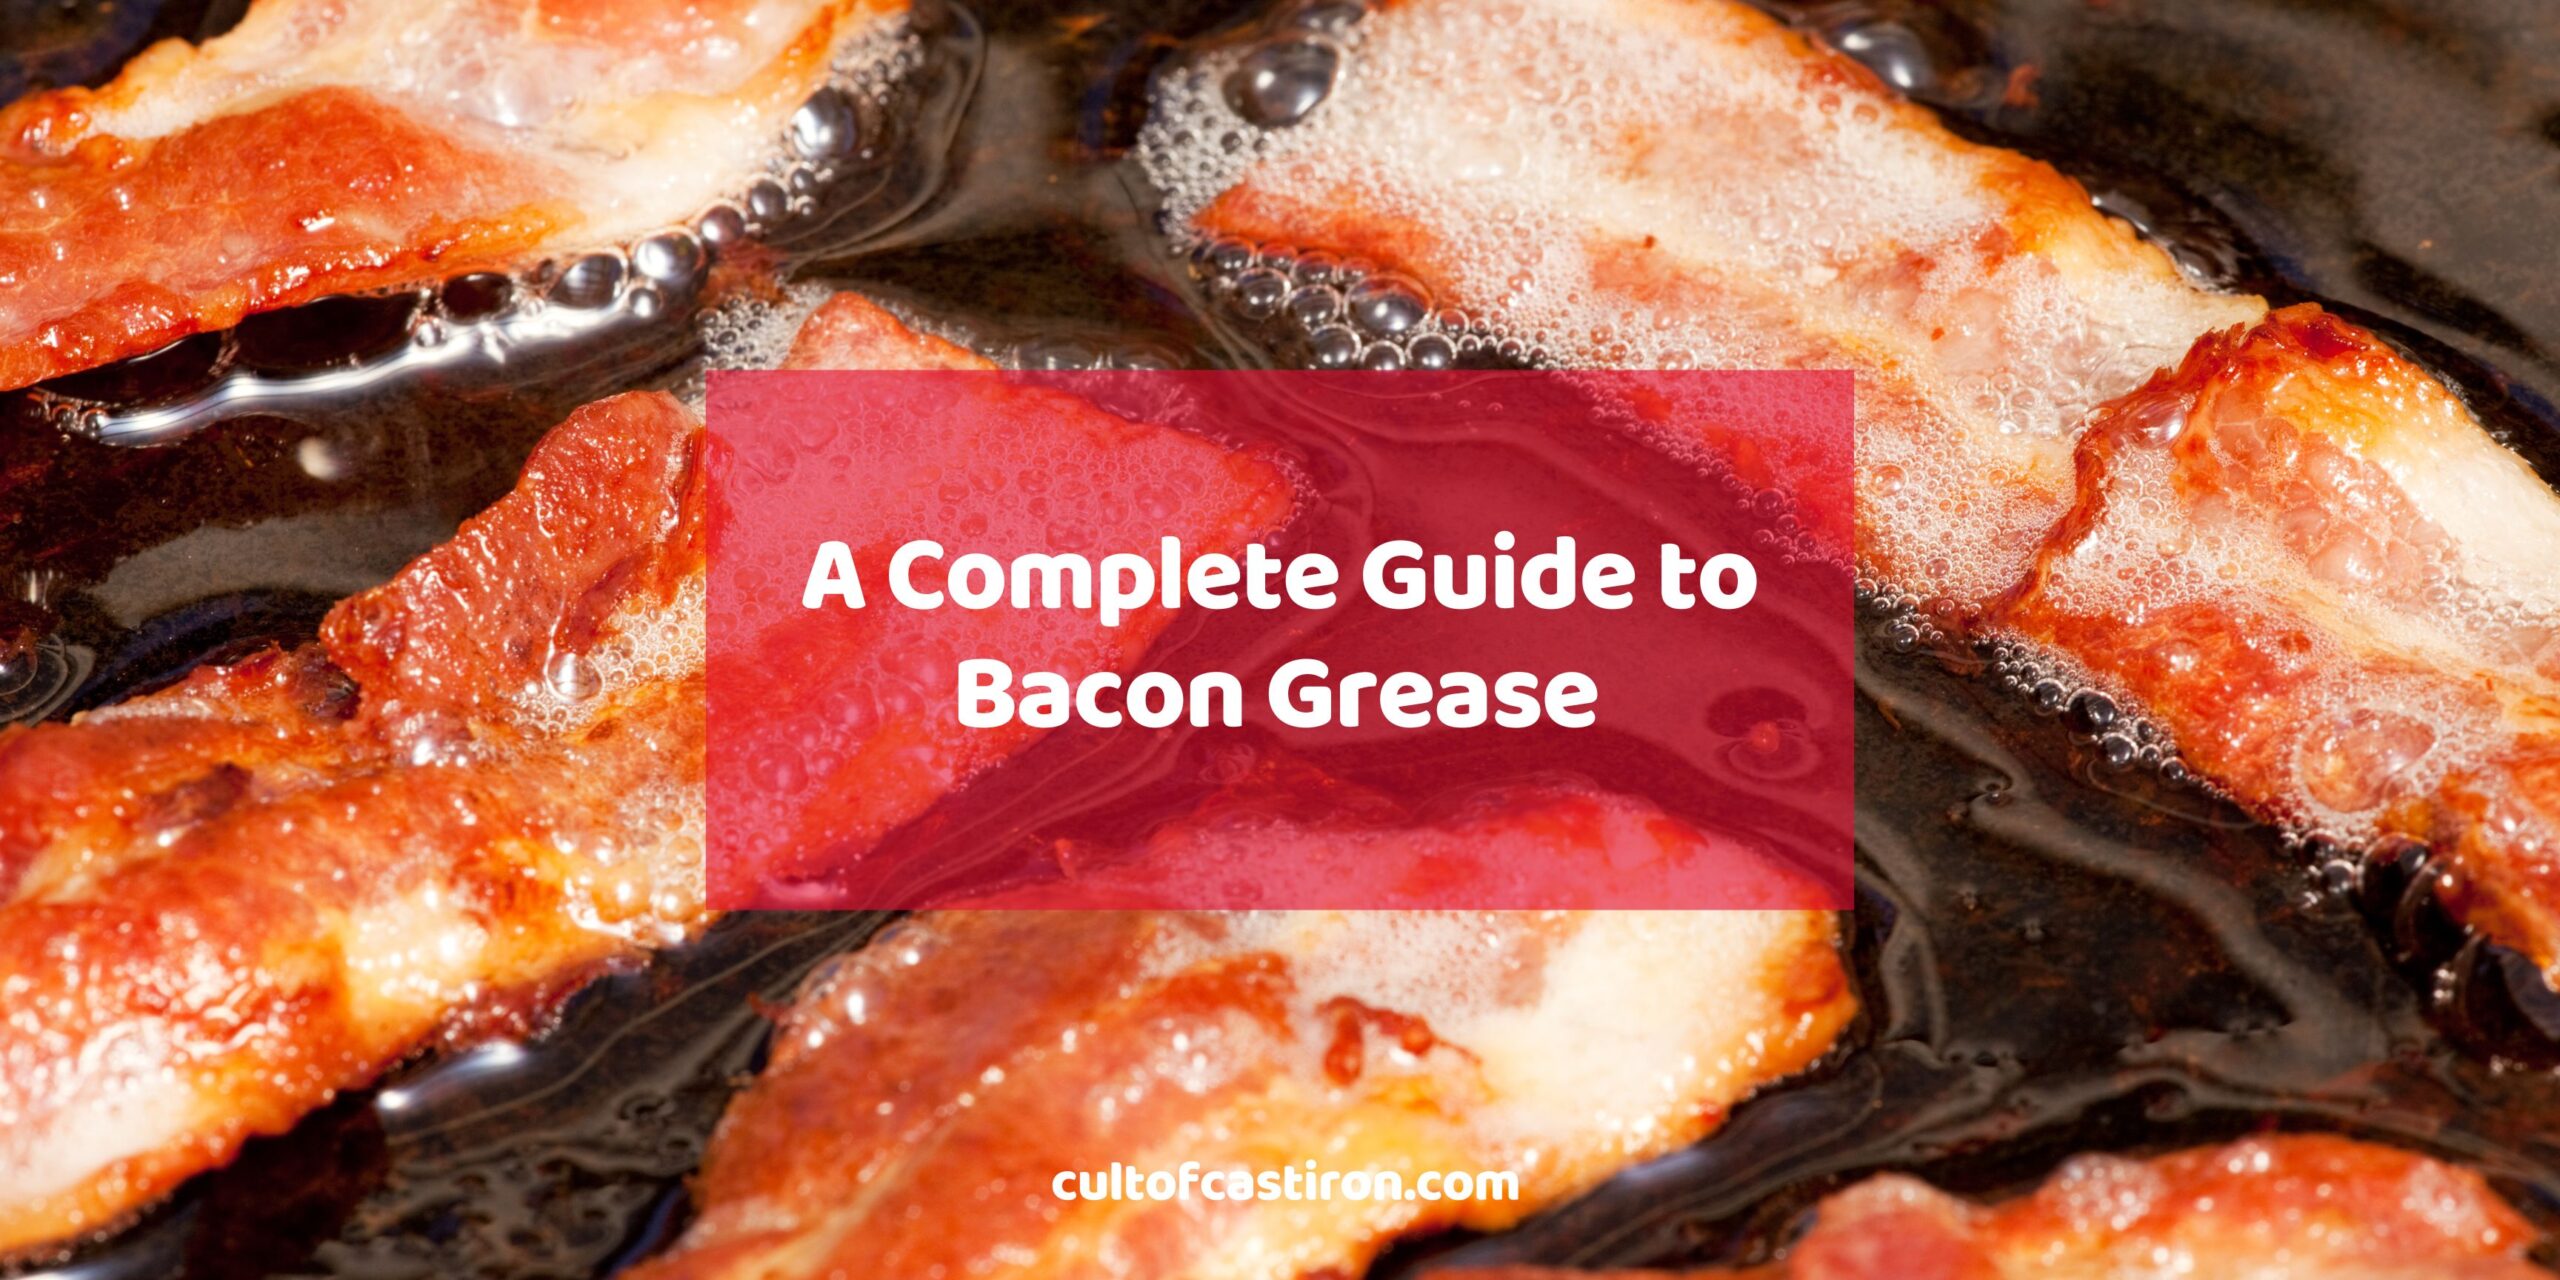 https://cultofcastiron.com/wp-content/uploads/2023/10/a-complete-guide-to-bacon-grease-banner-scaled.jpg